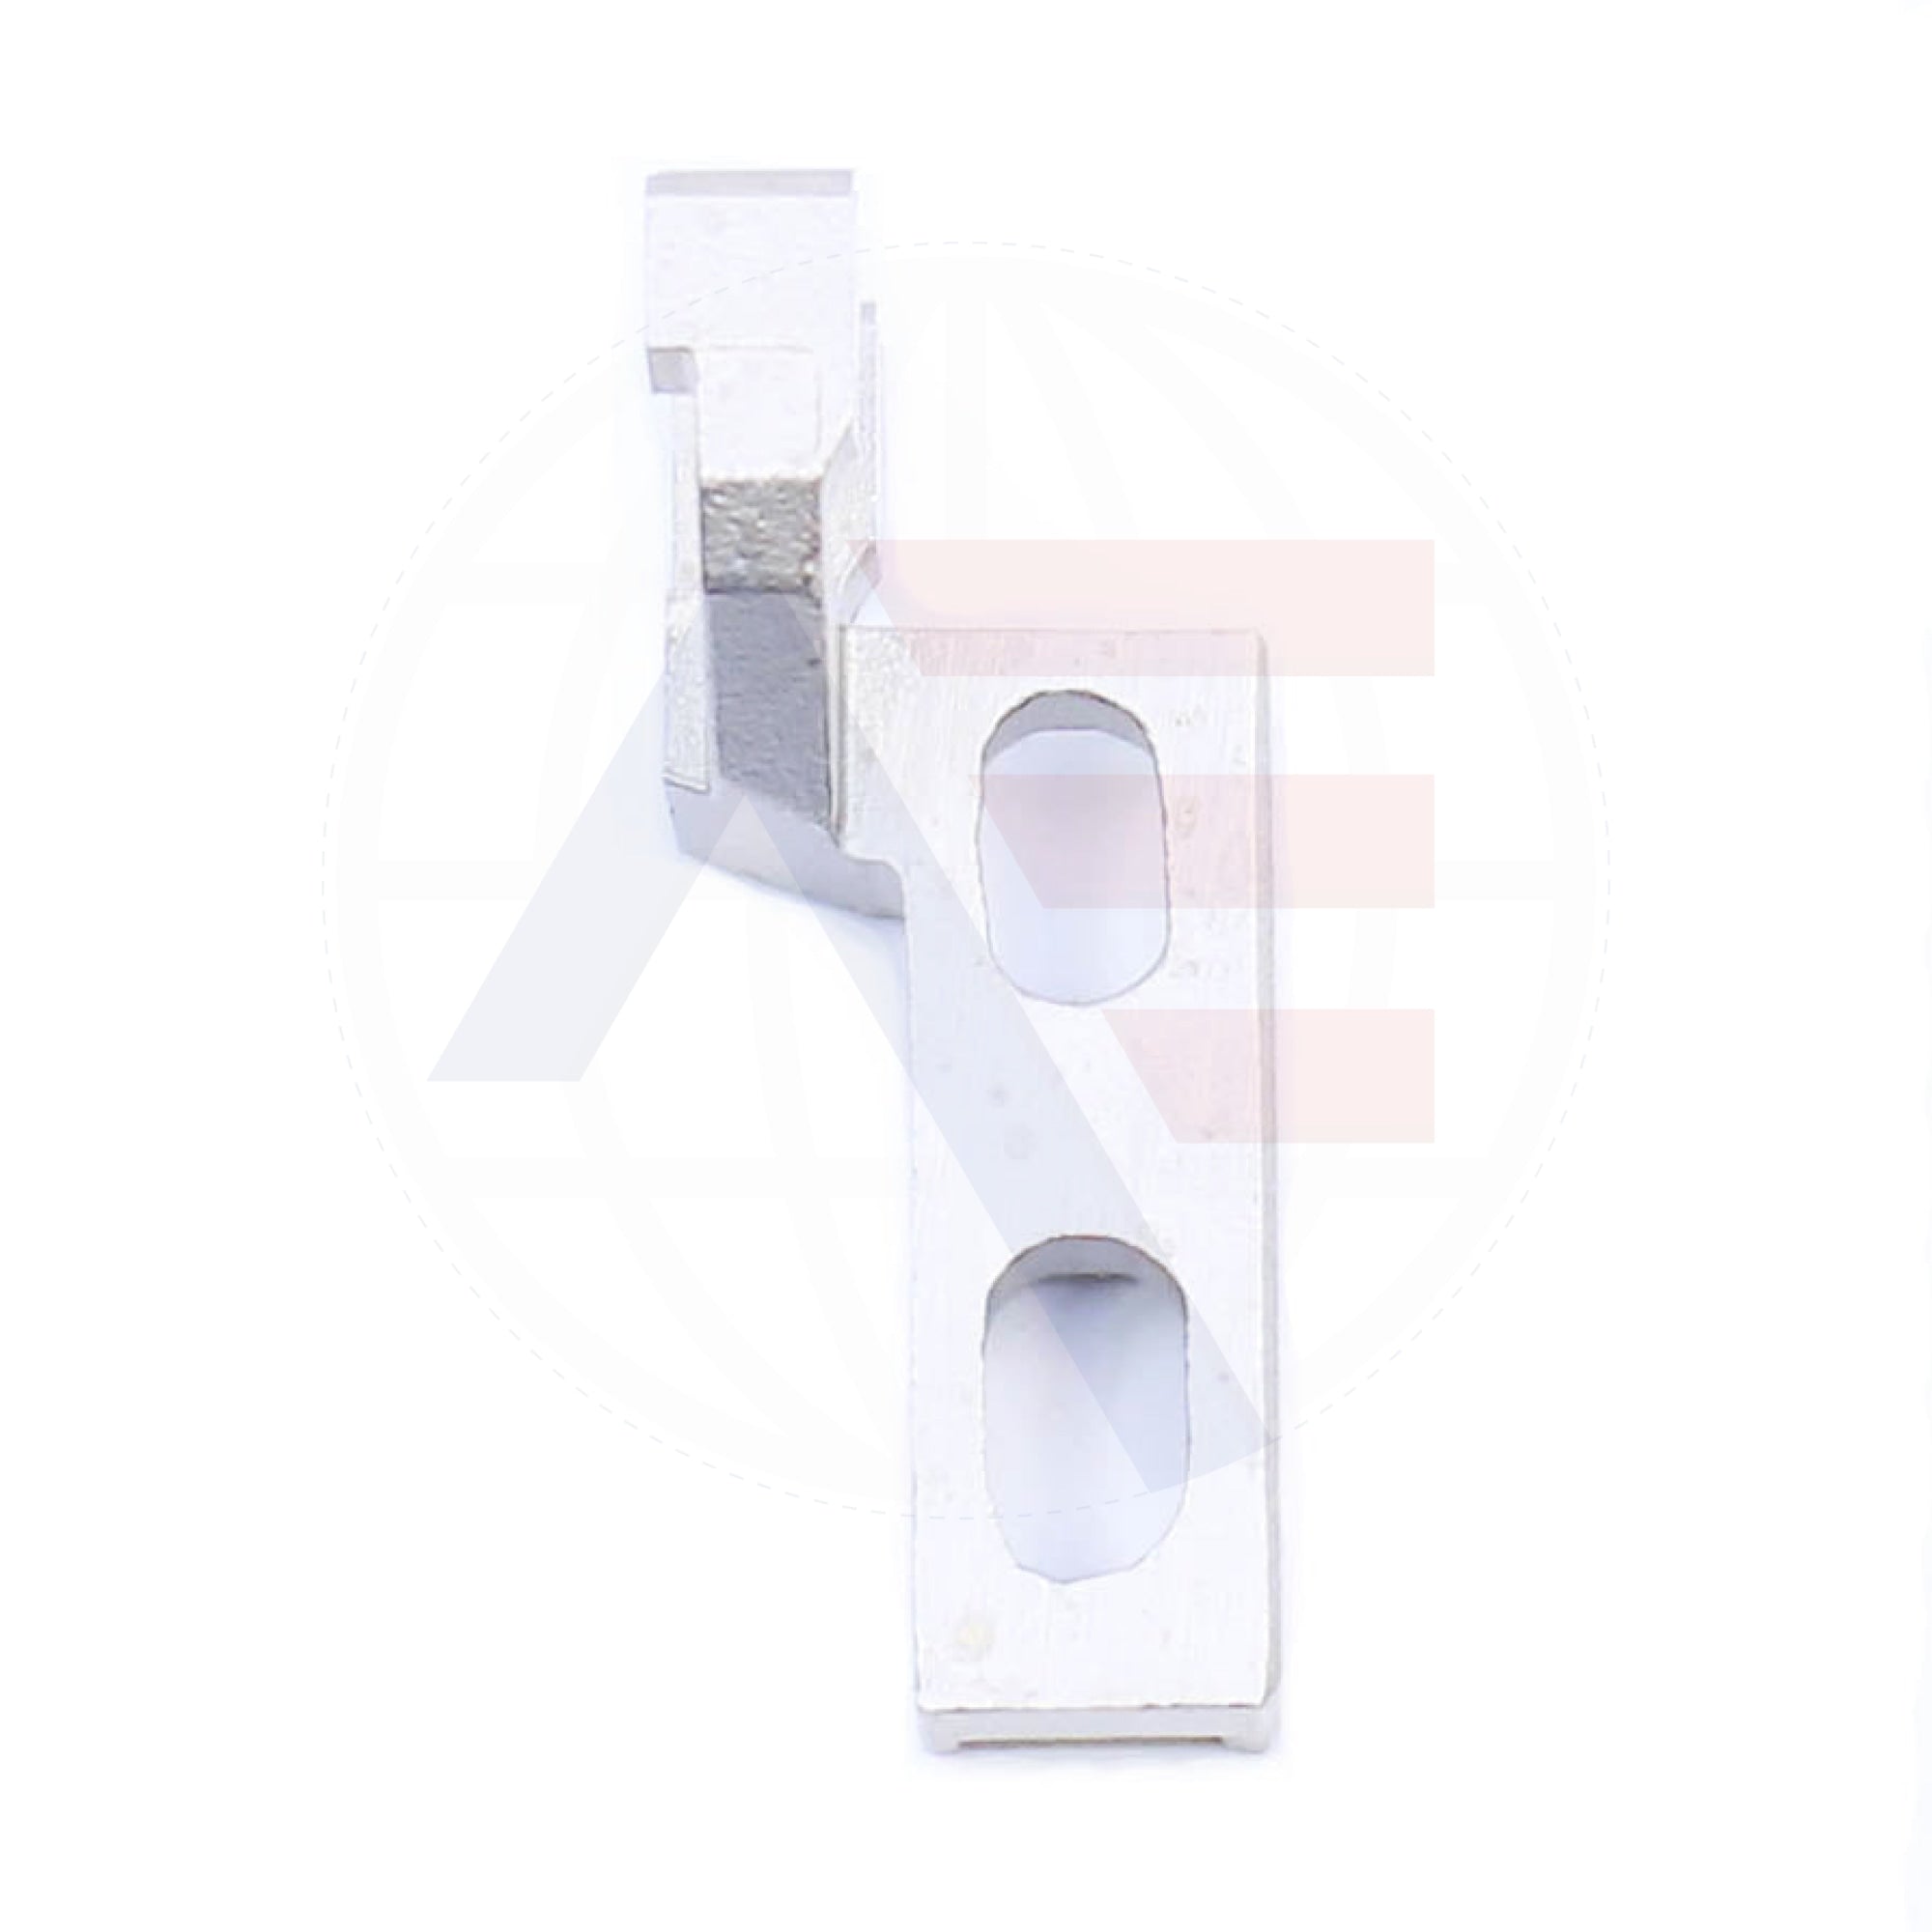 2106007 Main Feed Dog Sewing Machine Spare Parts